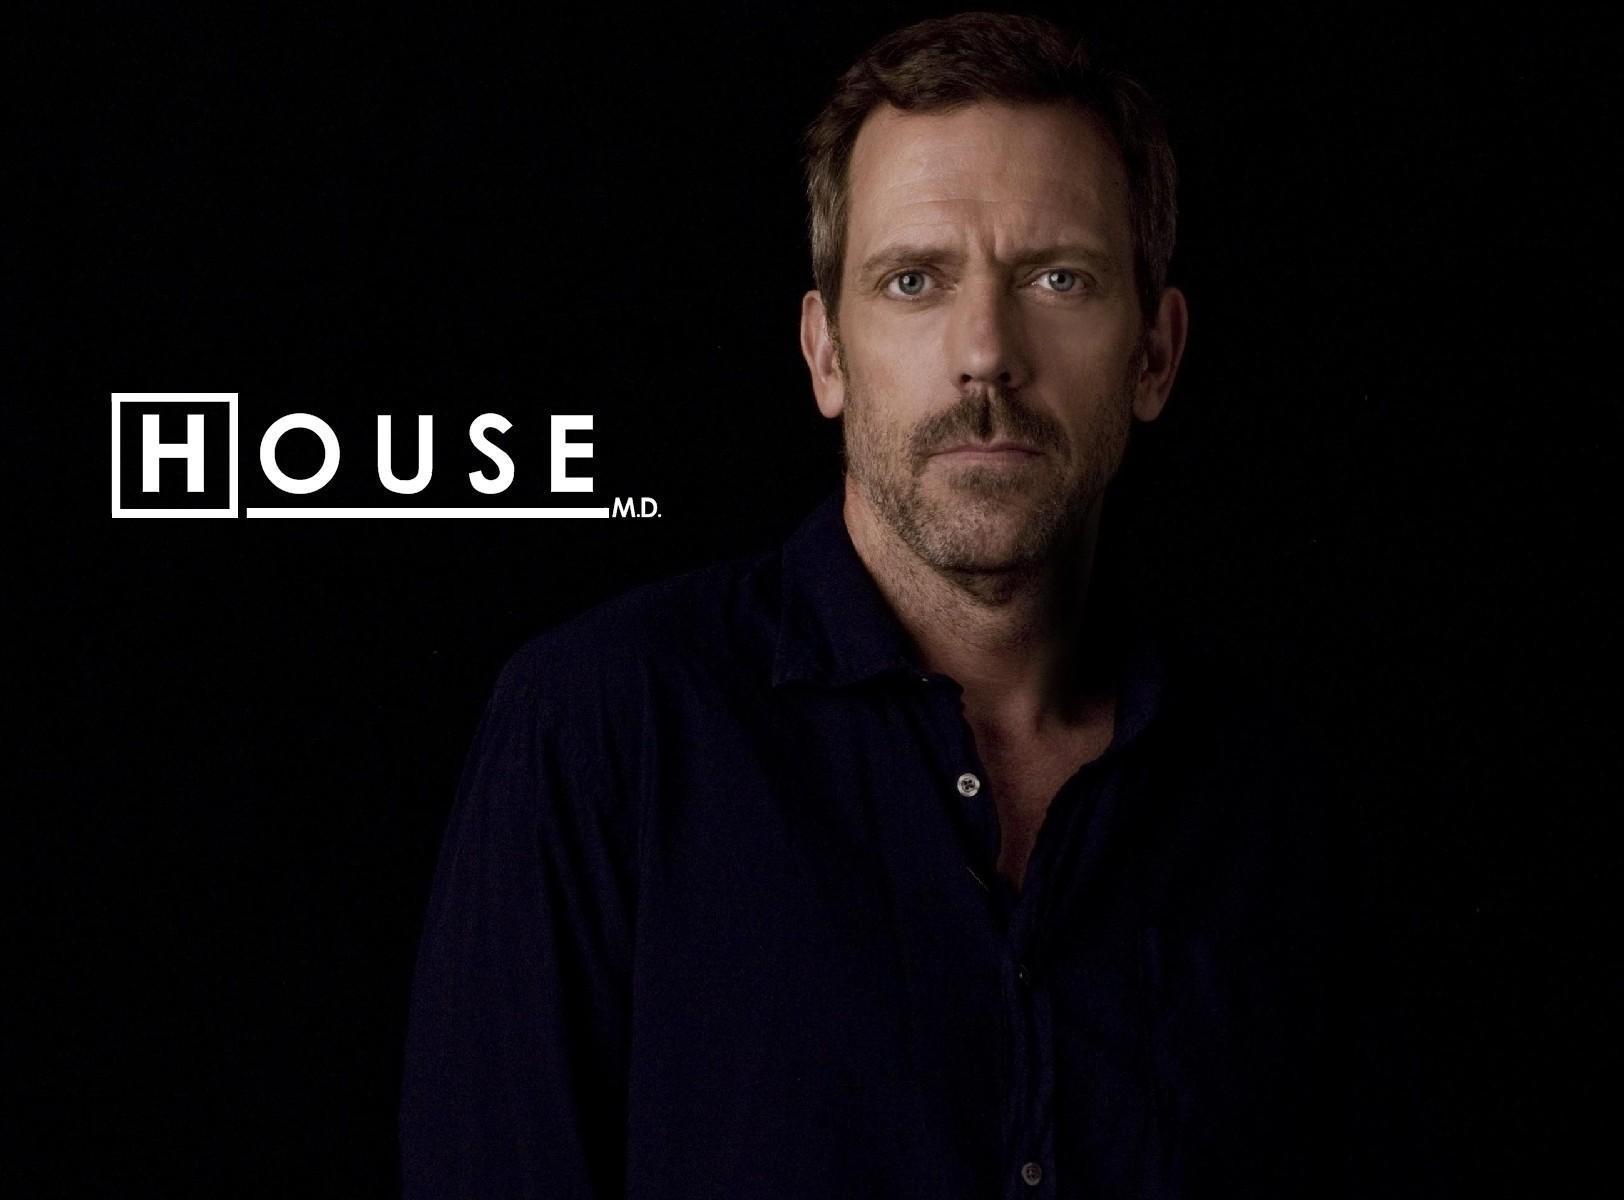 House MD - YouTube